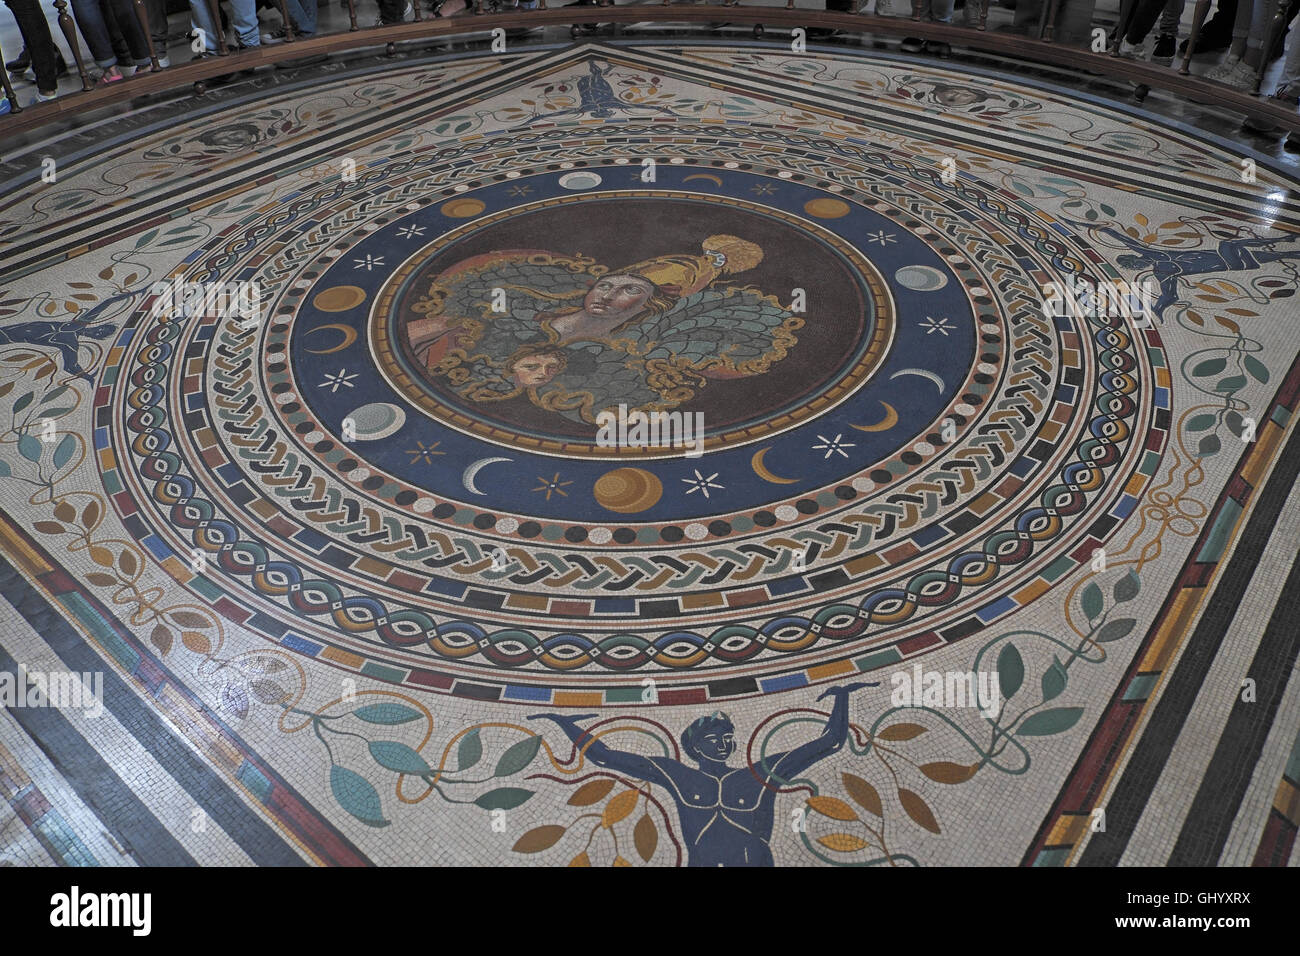 Mosaic floor, near the Museo Pio-Clementino, Vatican Museums, Vatican, Rome, Italy. Stock Photo